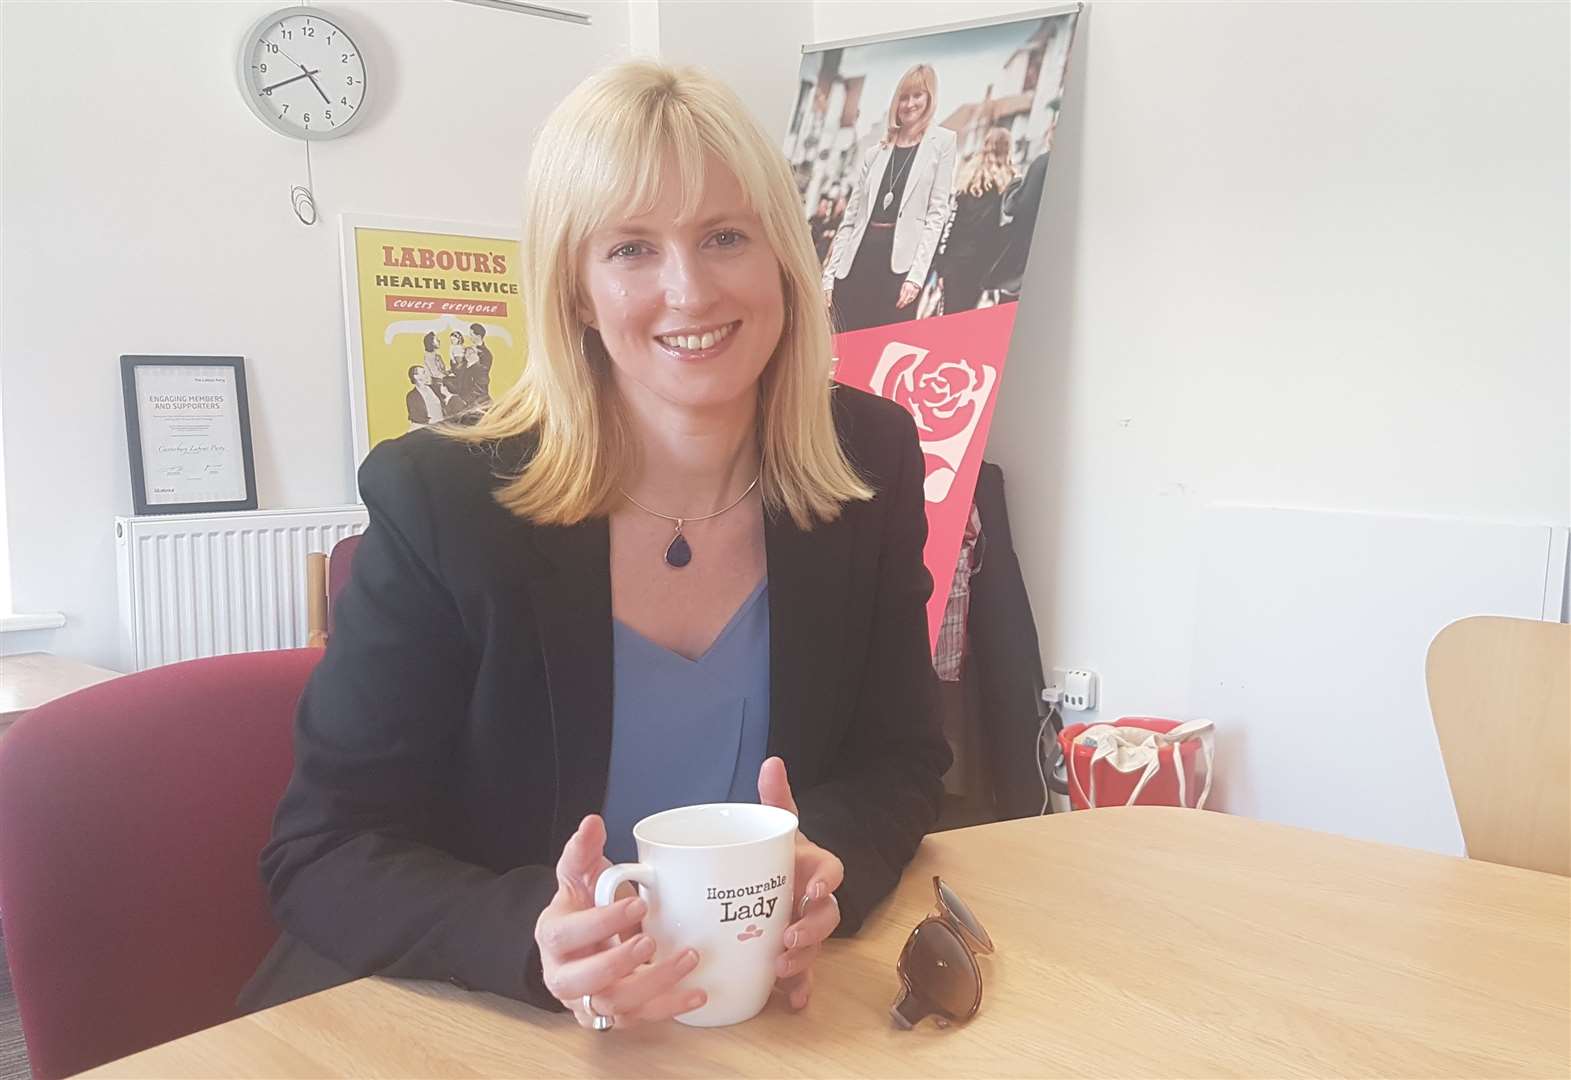 Rosie Duffield in her offices in Canterbury - her victory made headlines around the country